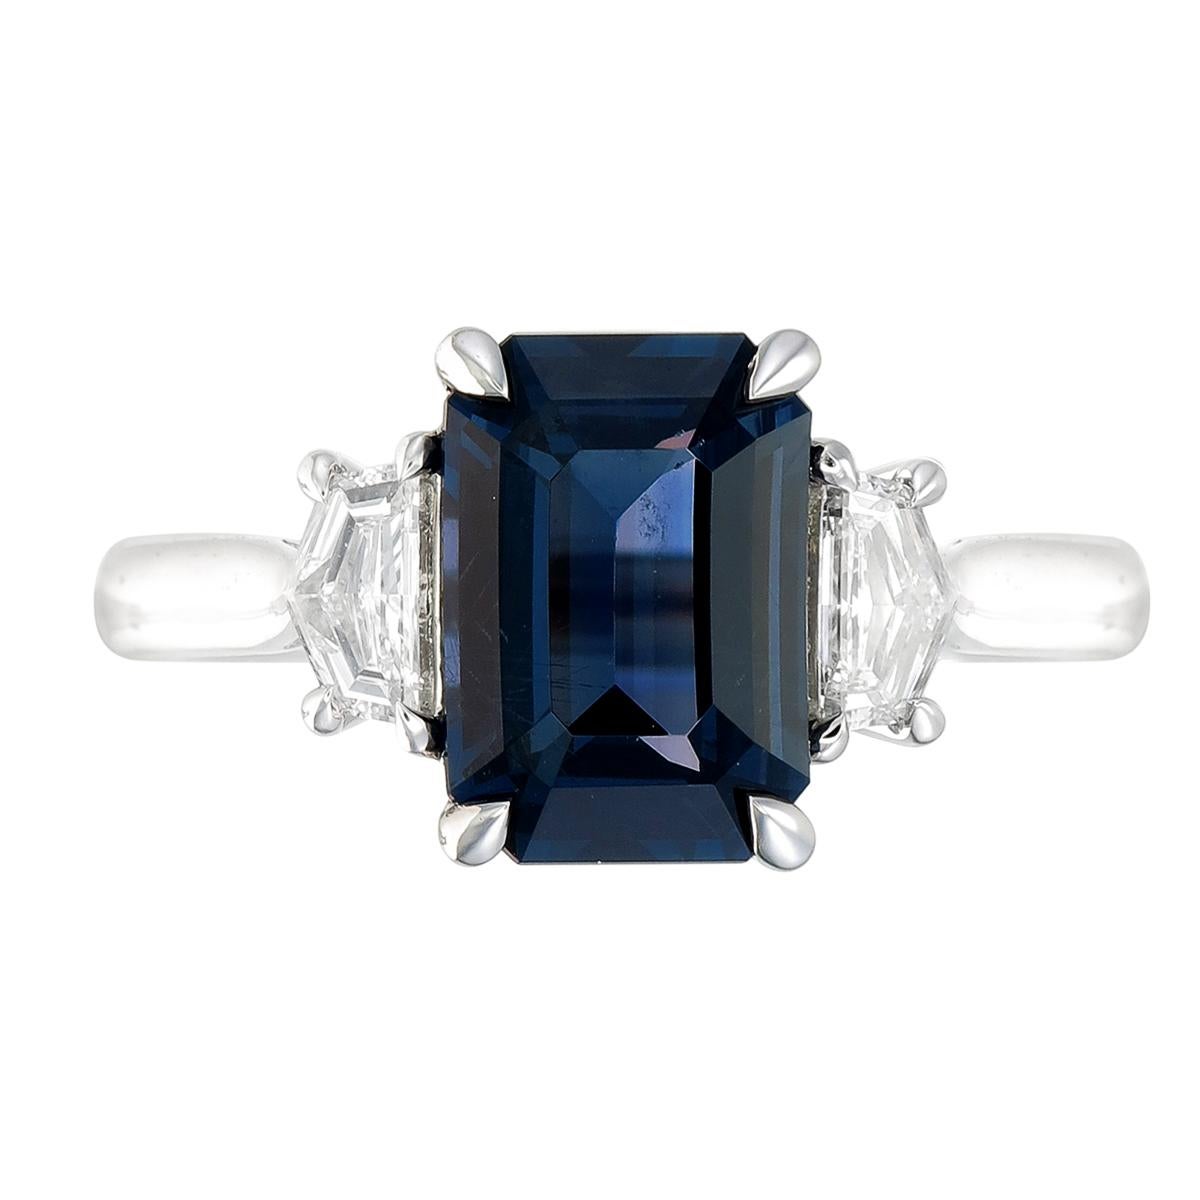 Orloff of Denmark - 'Blue Monsoon'
Platinum ring set with a 2.59 carat Color Change Spinel along with two VVS, F, 0.34 carat Cadillac cut diamonds.

At the very heart of this enchanting creation lies a color-change blue spinel, this spellbinding gem